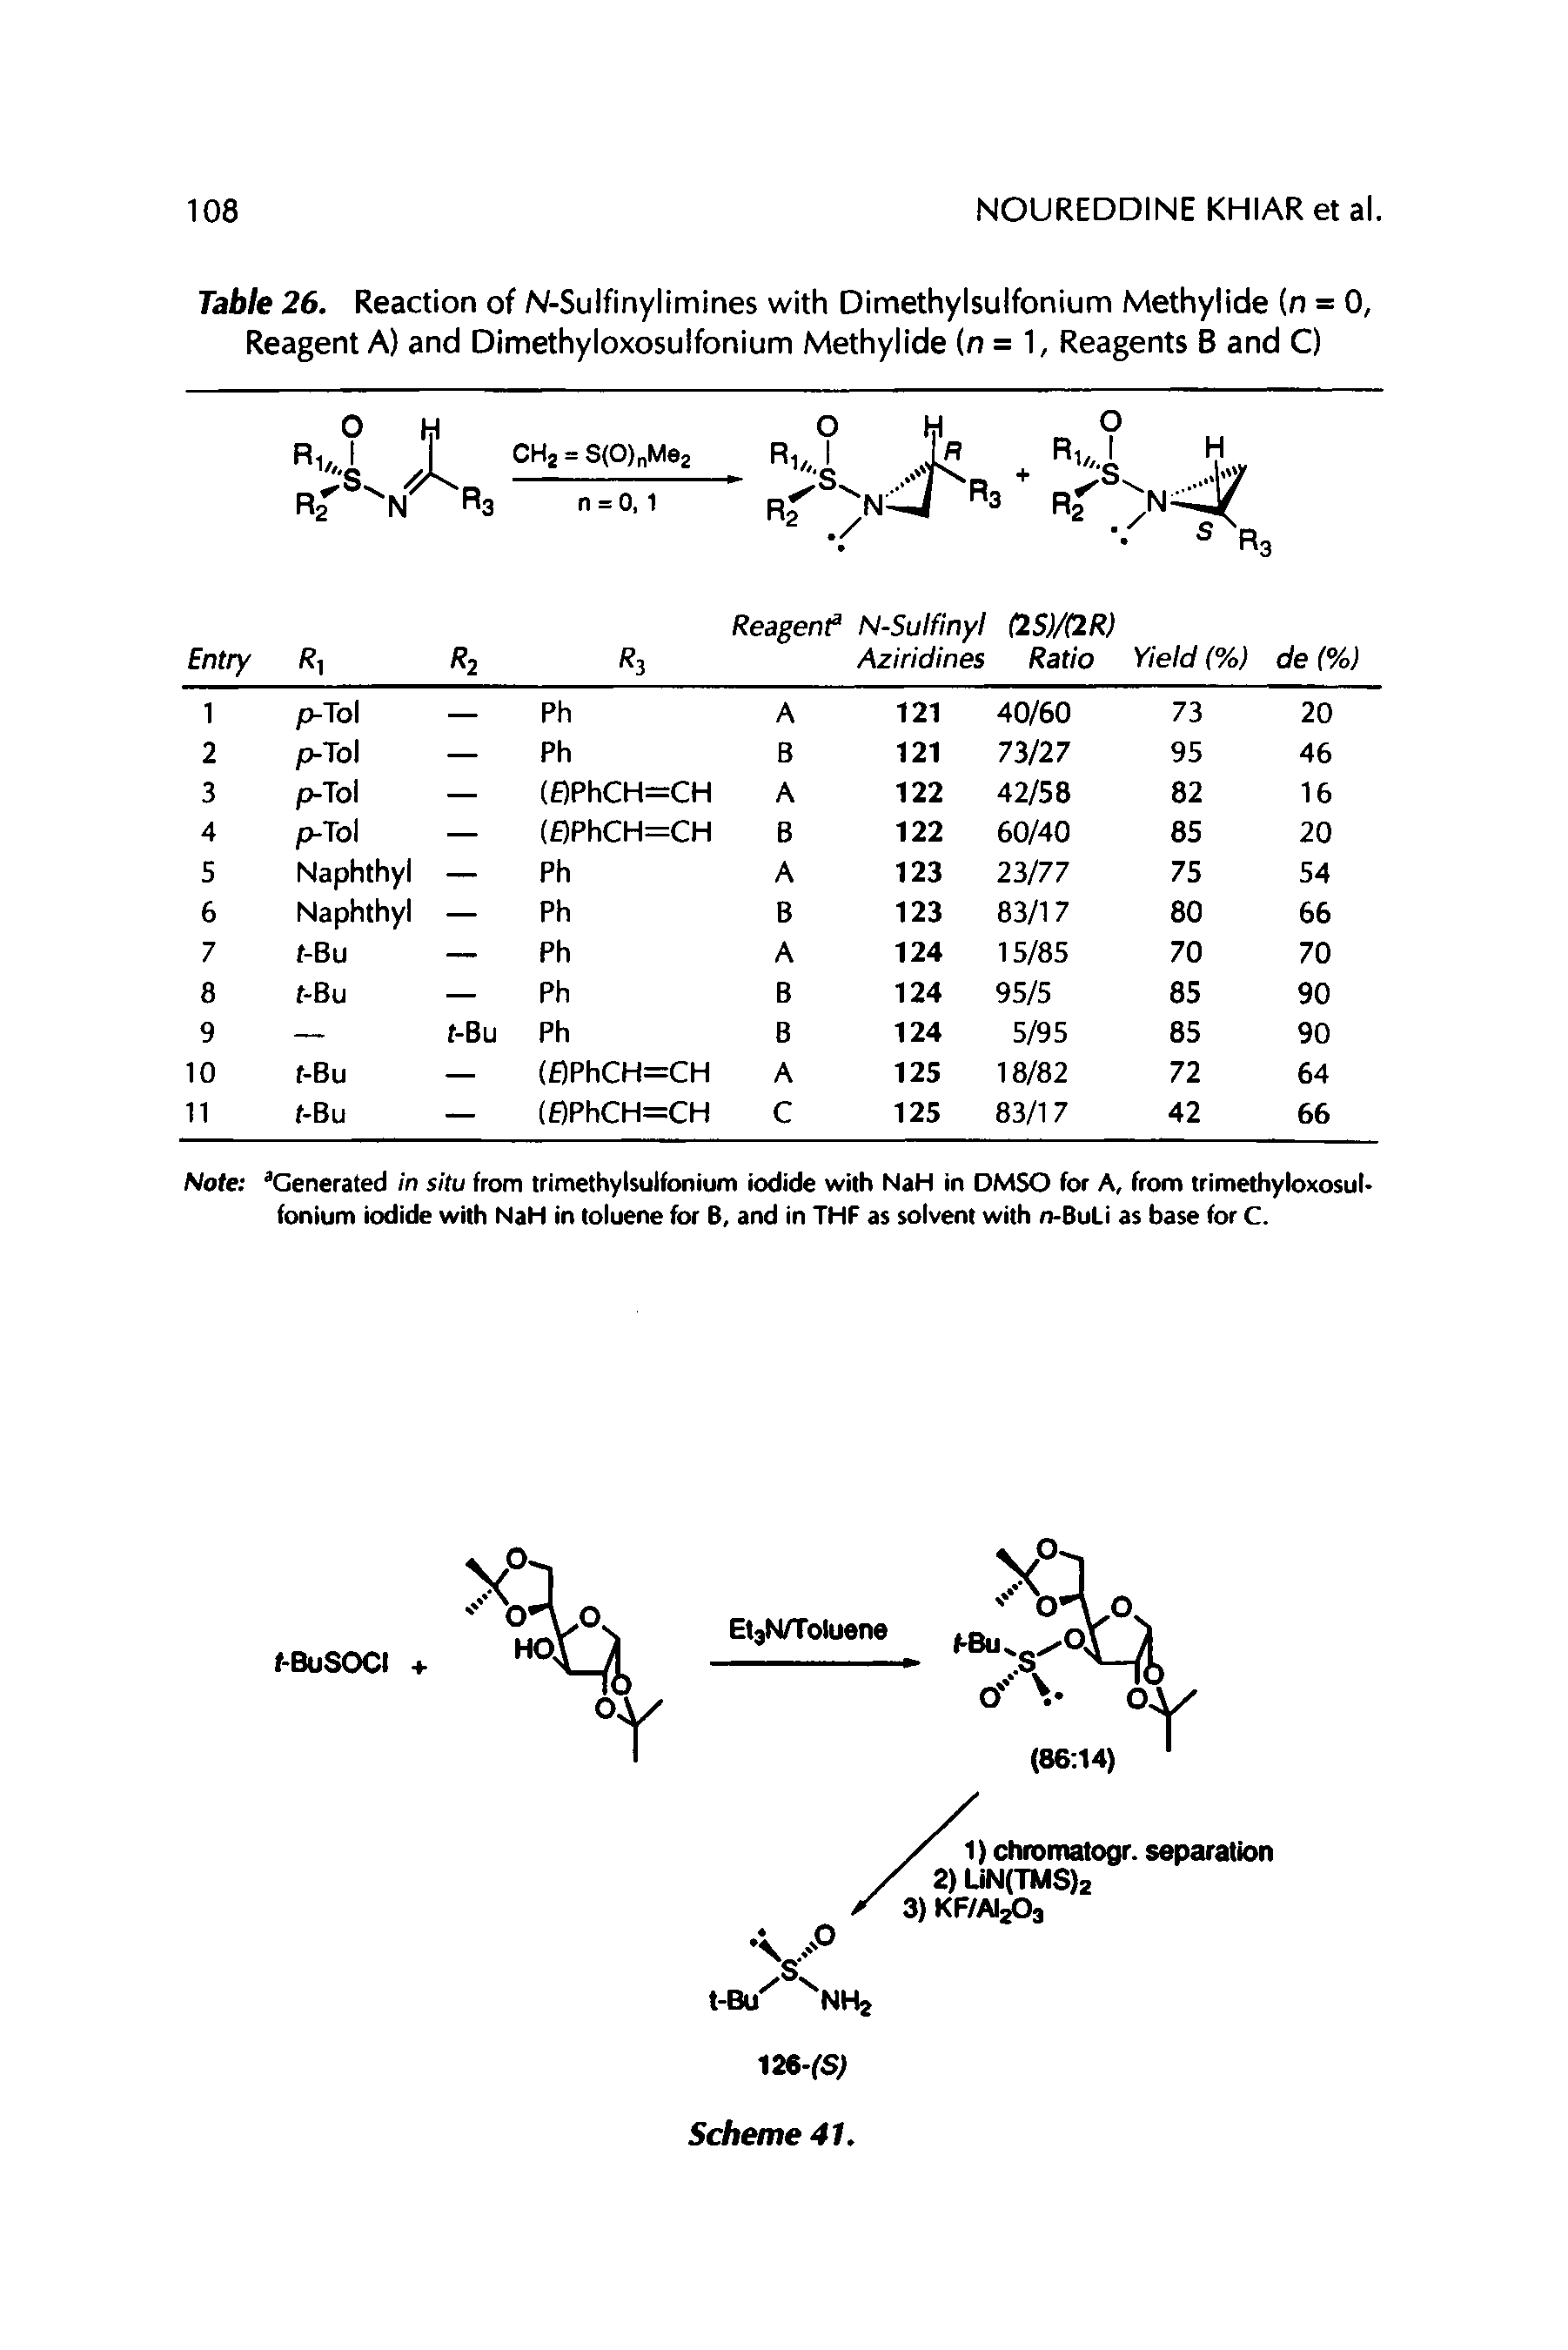 Table 26. Reaction of N-Sulfinylimines with Dimethylsulfonium Methylide (n = 0, Reagent A) and Dimethyloxosulfonium Methylide (n = 1, Reagents B and C)...